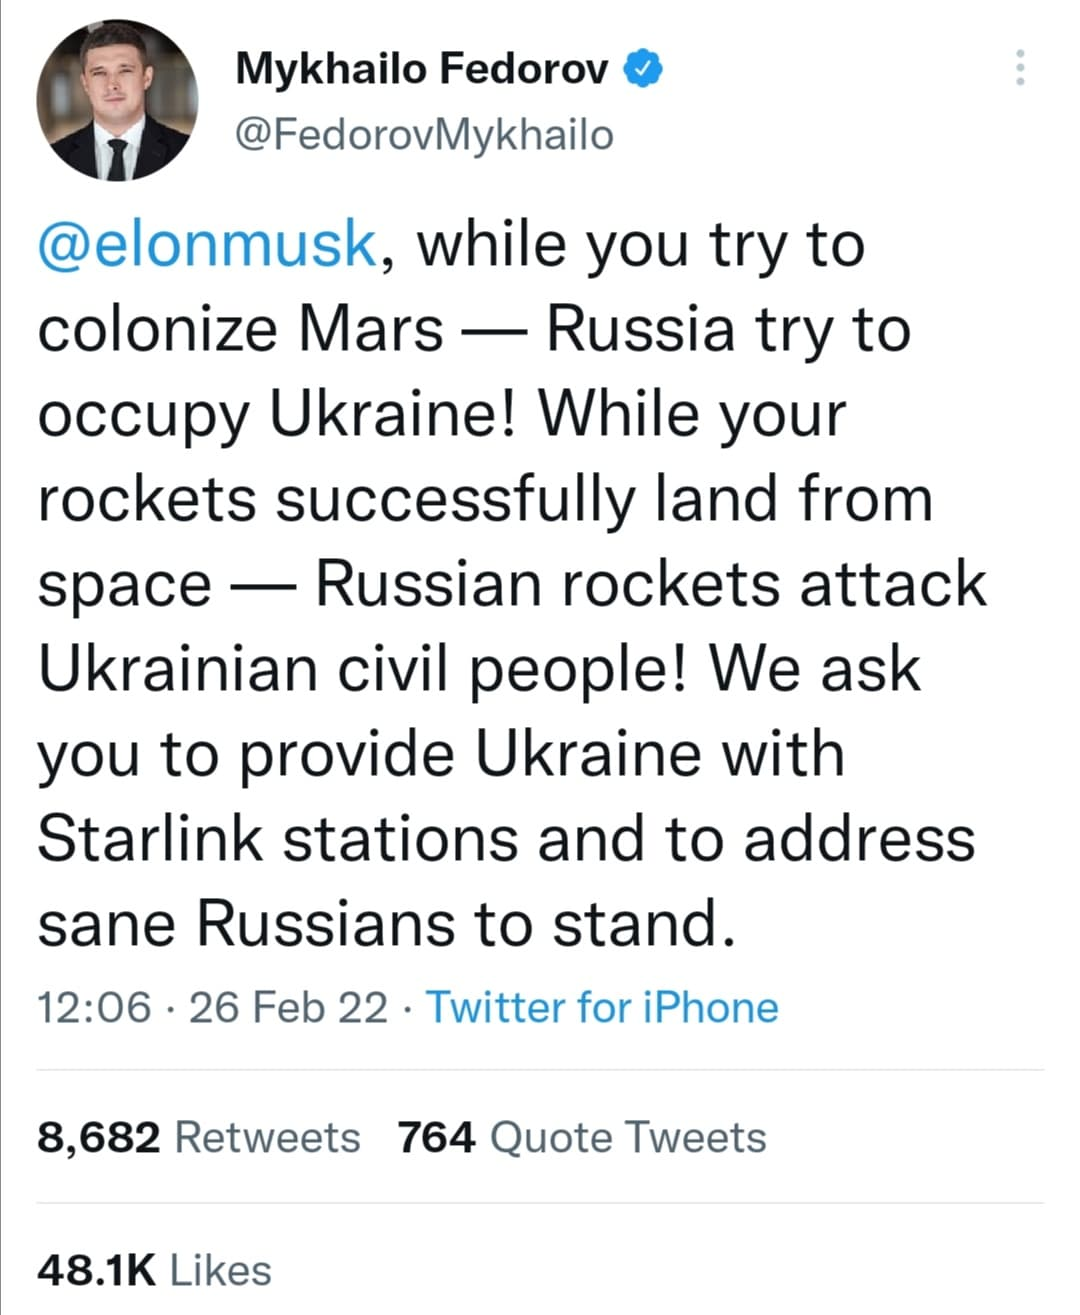 Tweet reads: @elonmusk, while you try to colonize Mars - Russia try to occupy Ukraine! While your rockets successfully land from space - Russian rockets attack Ukrainian civil people! We ask you to provide Ukraine with Starlink stations and to address sane Russians to stand.